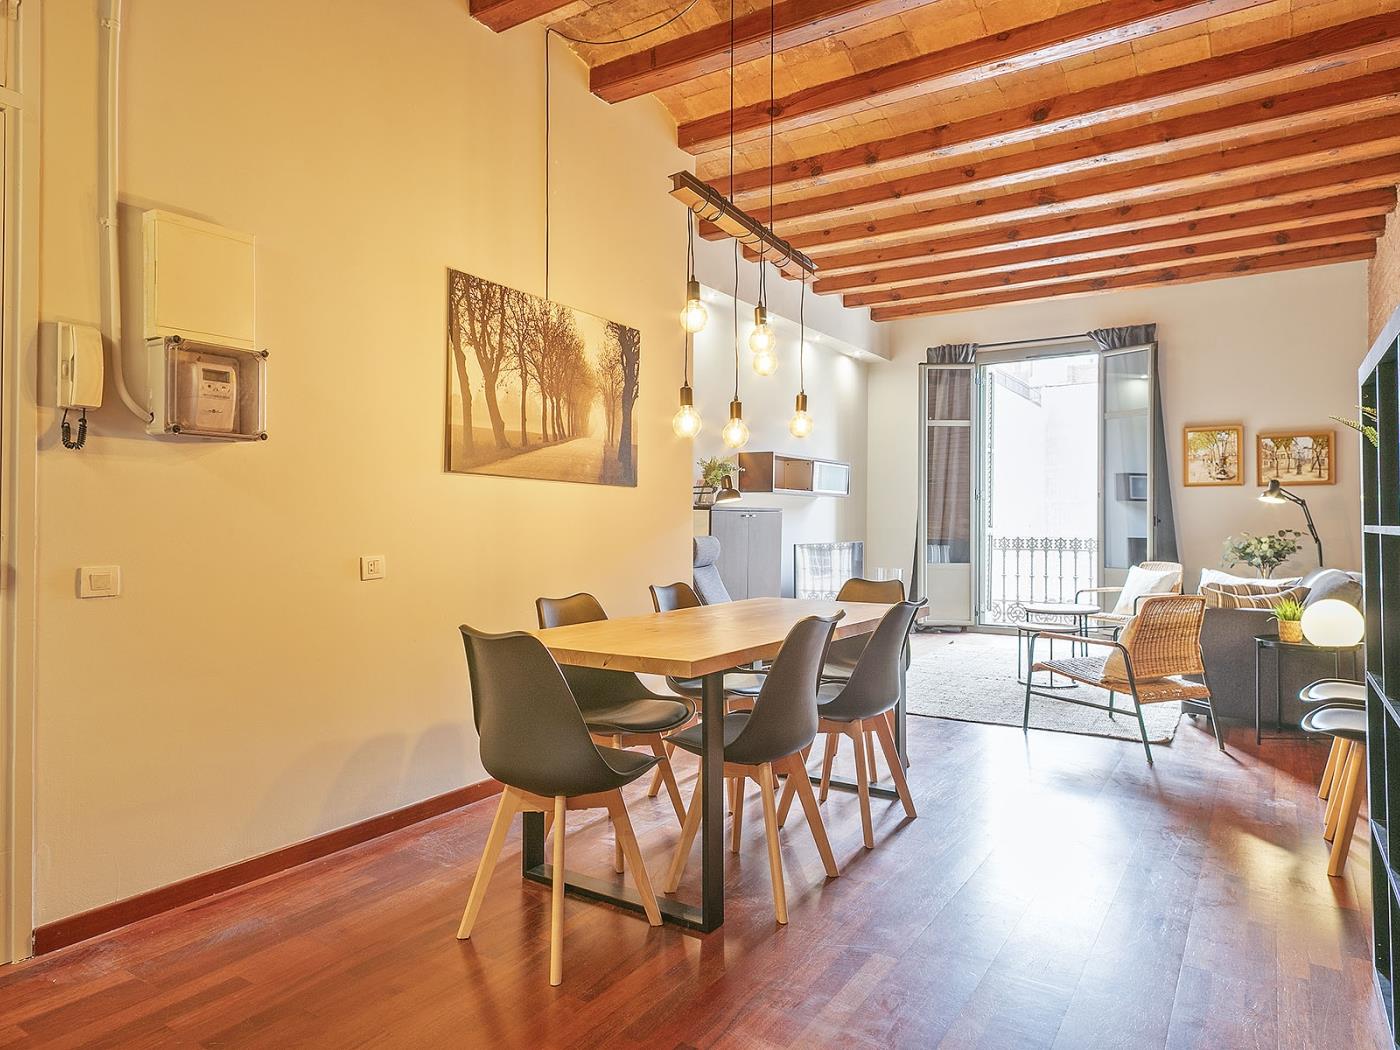 My Space Barcelona Bright apartment in Gràcia newly renovated ideal for families - My Space Barcelona Apartments